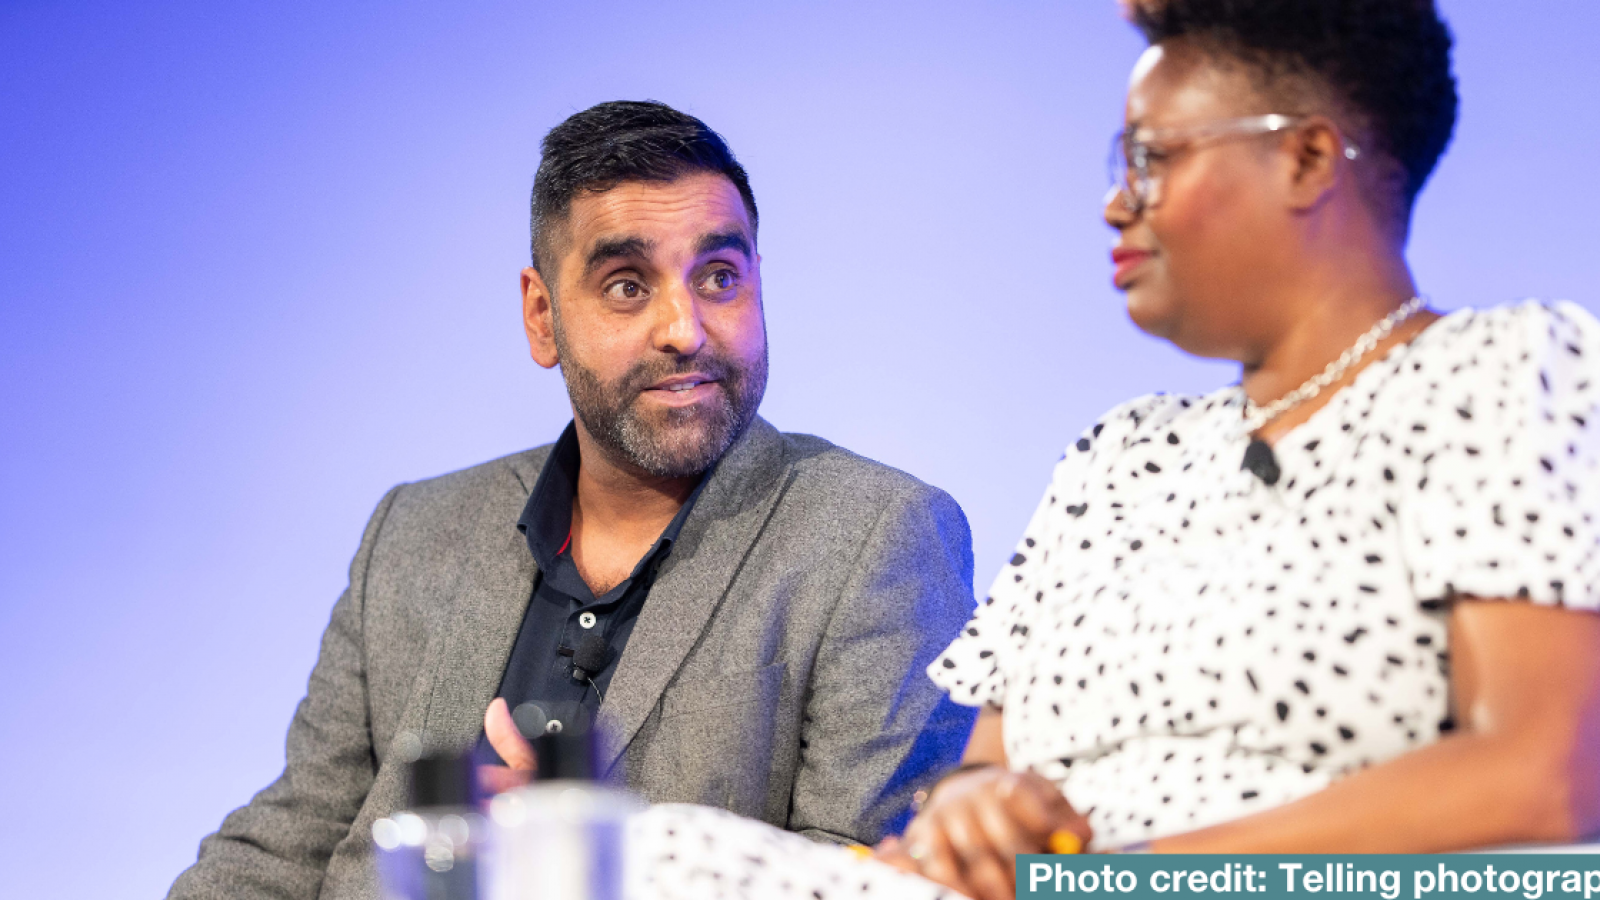 A man and woman are sat having a conversation at a panel event